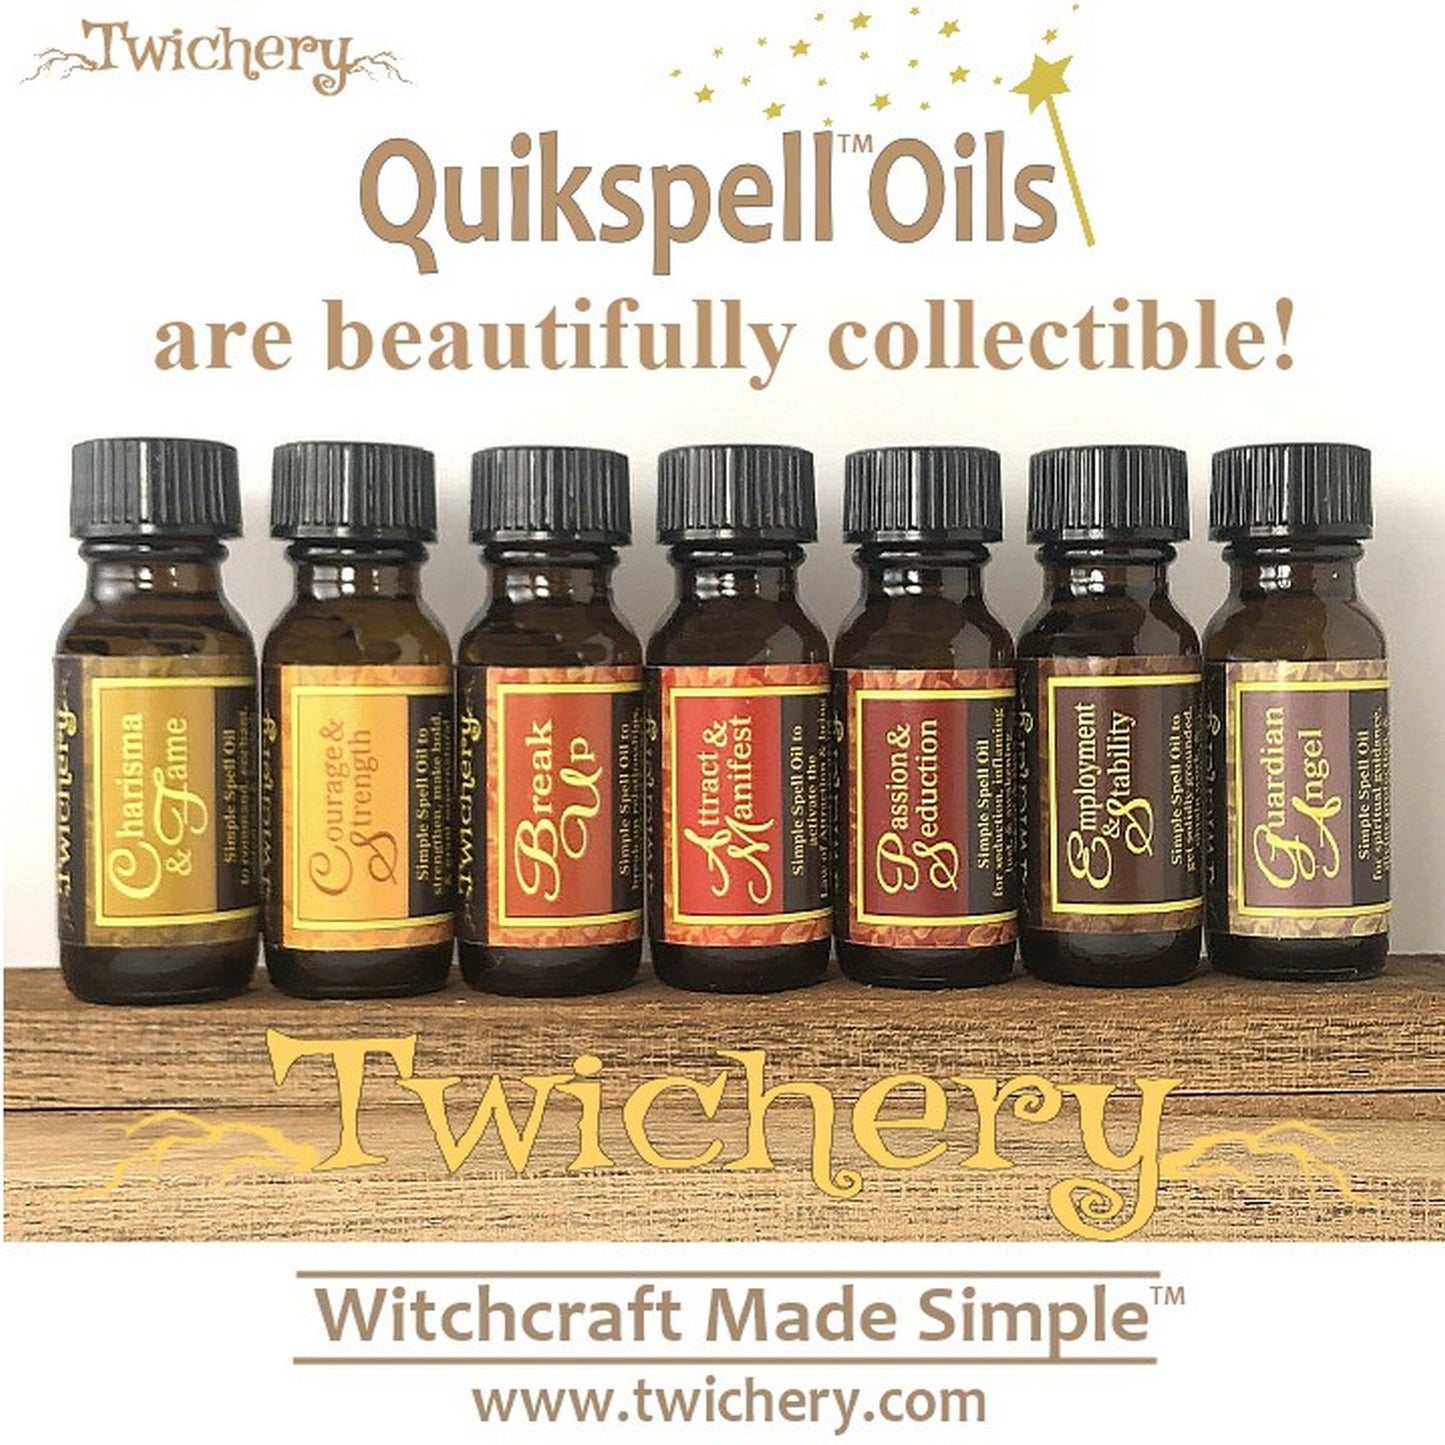 Collect all 24 Twichery Quikspell Oils for all your magickal needs, including grounding after spiritual work. Hoodoo, Voodoo, Wicca, Witchcraft Made Simple